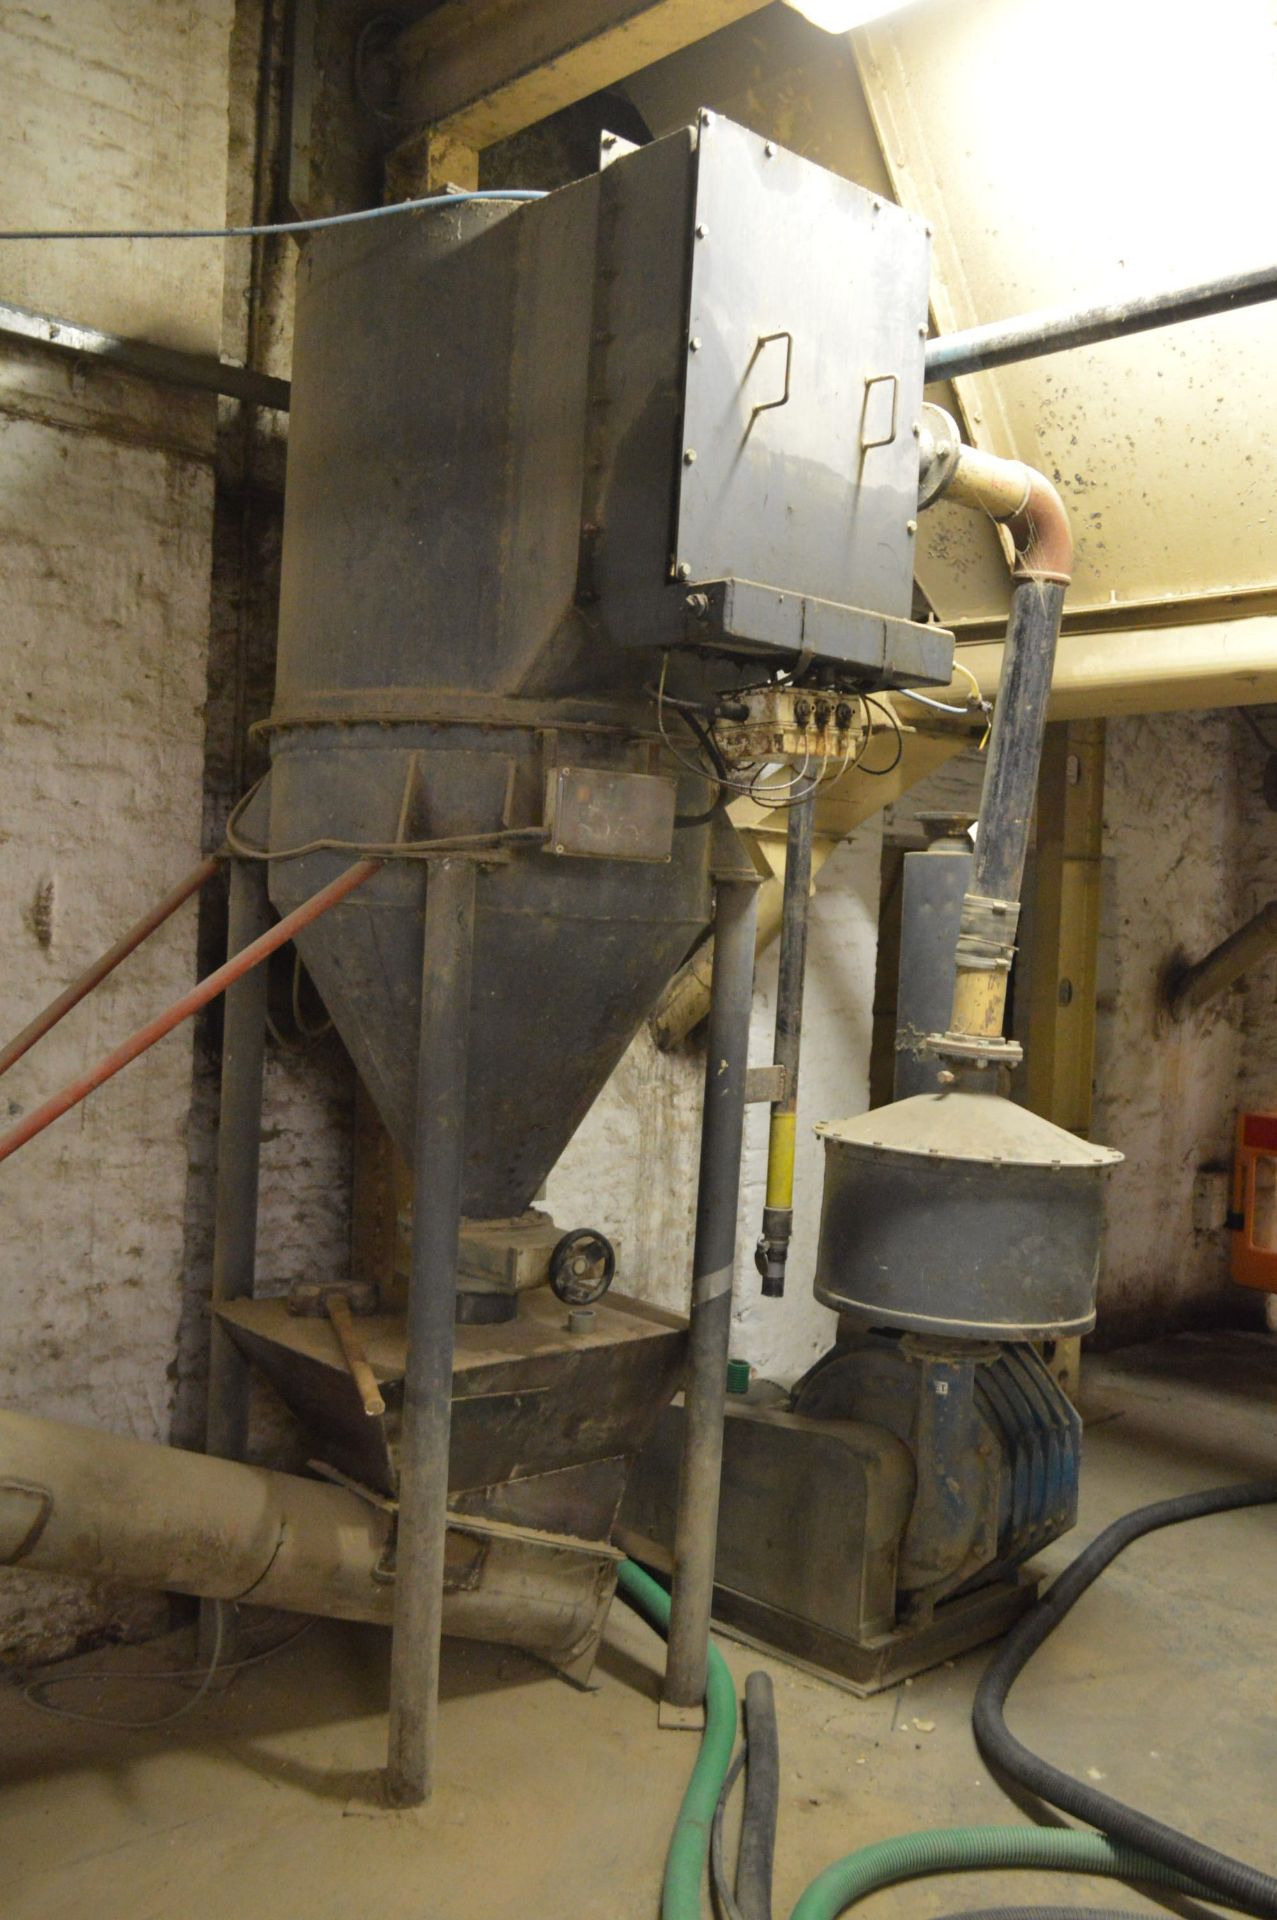 MILL CENTRAL VACUUM SYSTEM, with vacuum, filted11kW electric motor, receiver unit fitted filter, - Image 2 of 4